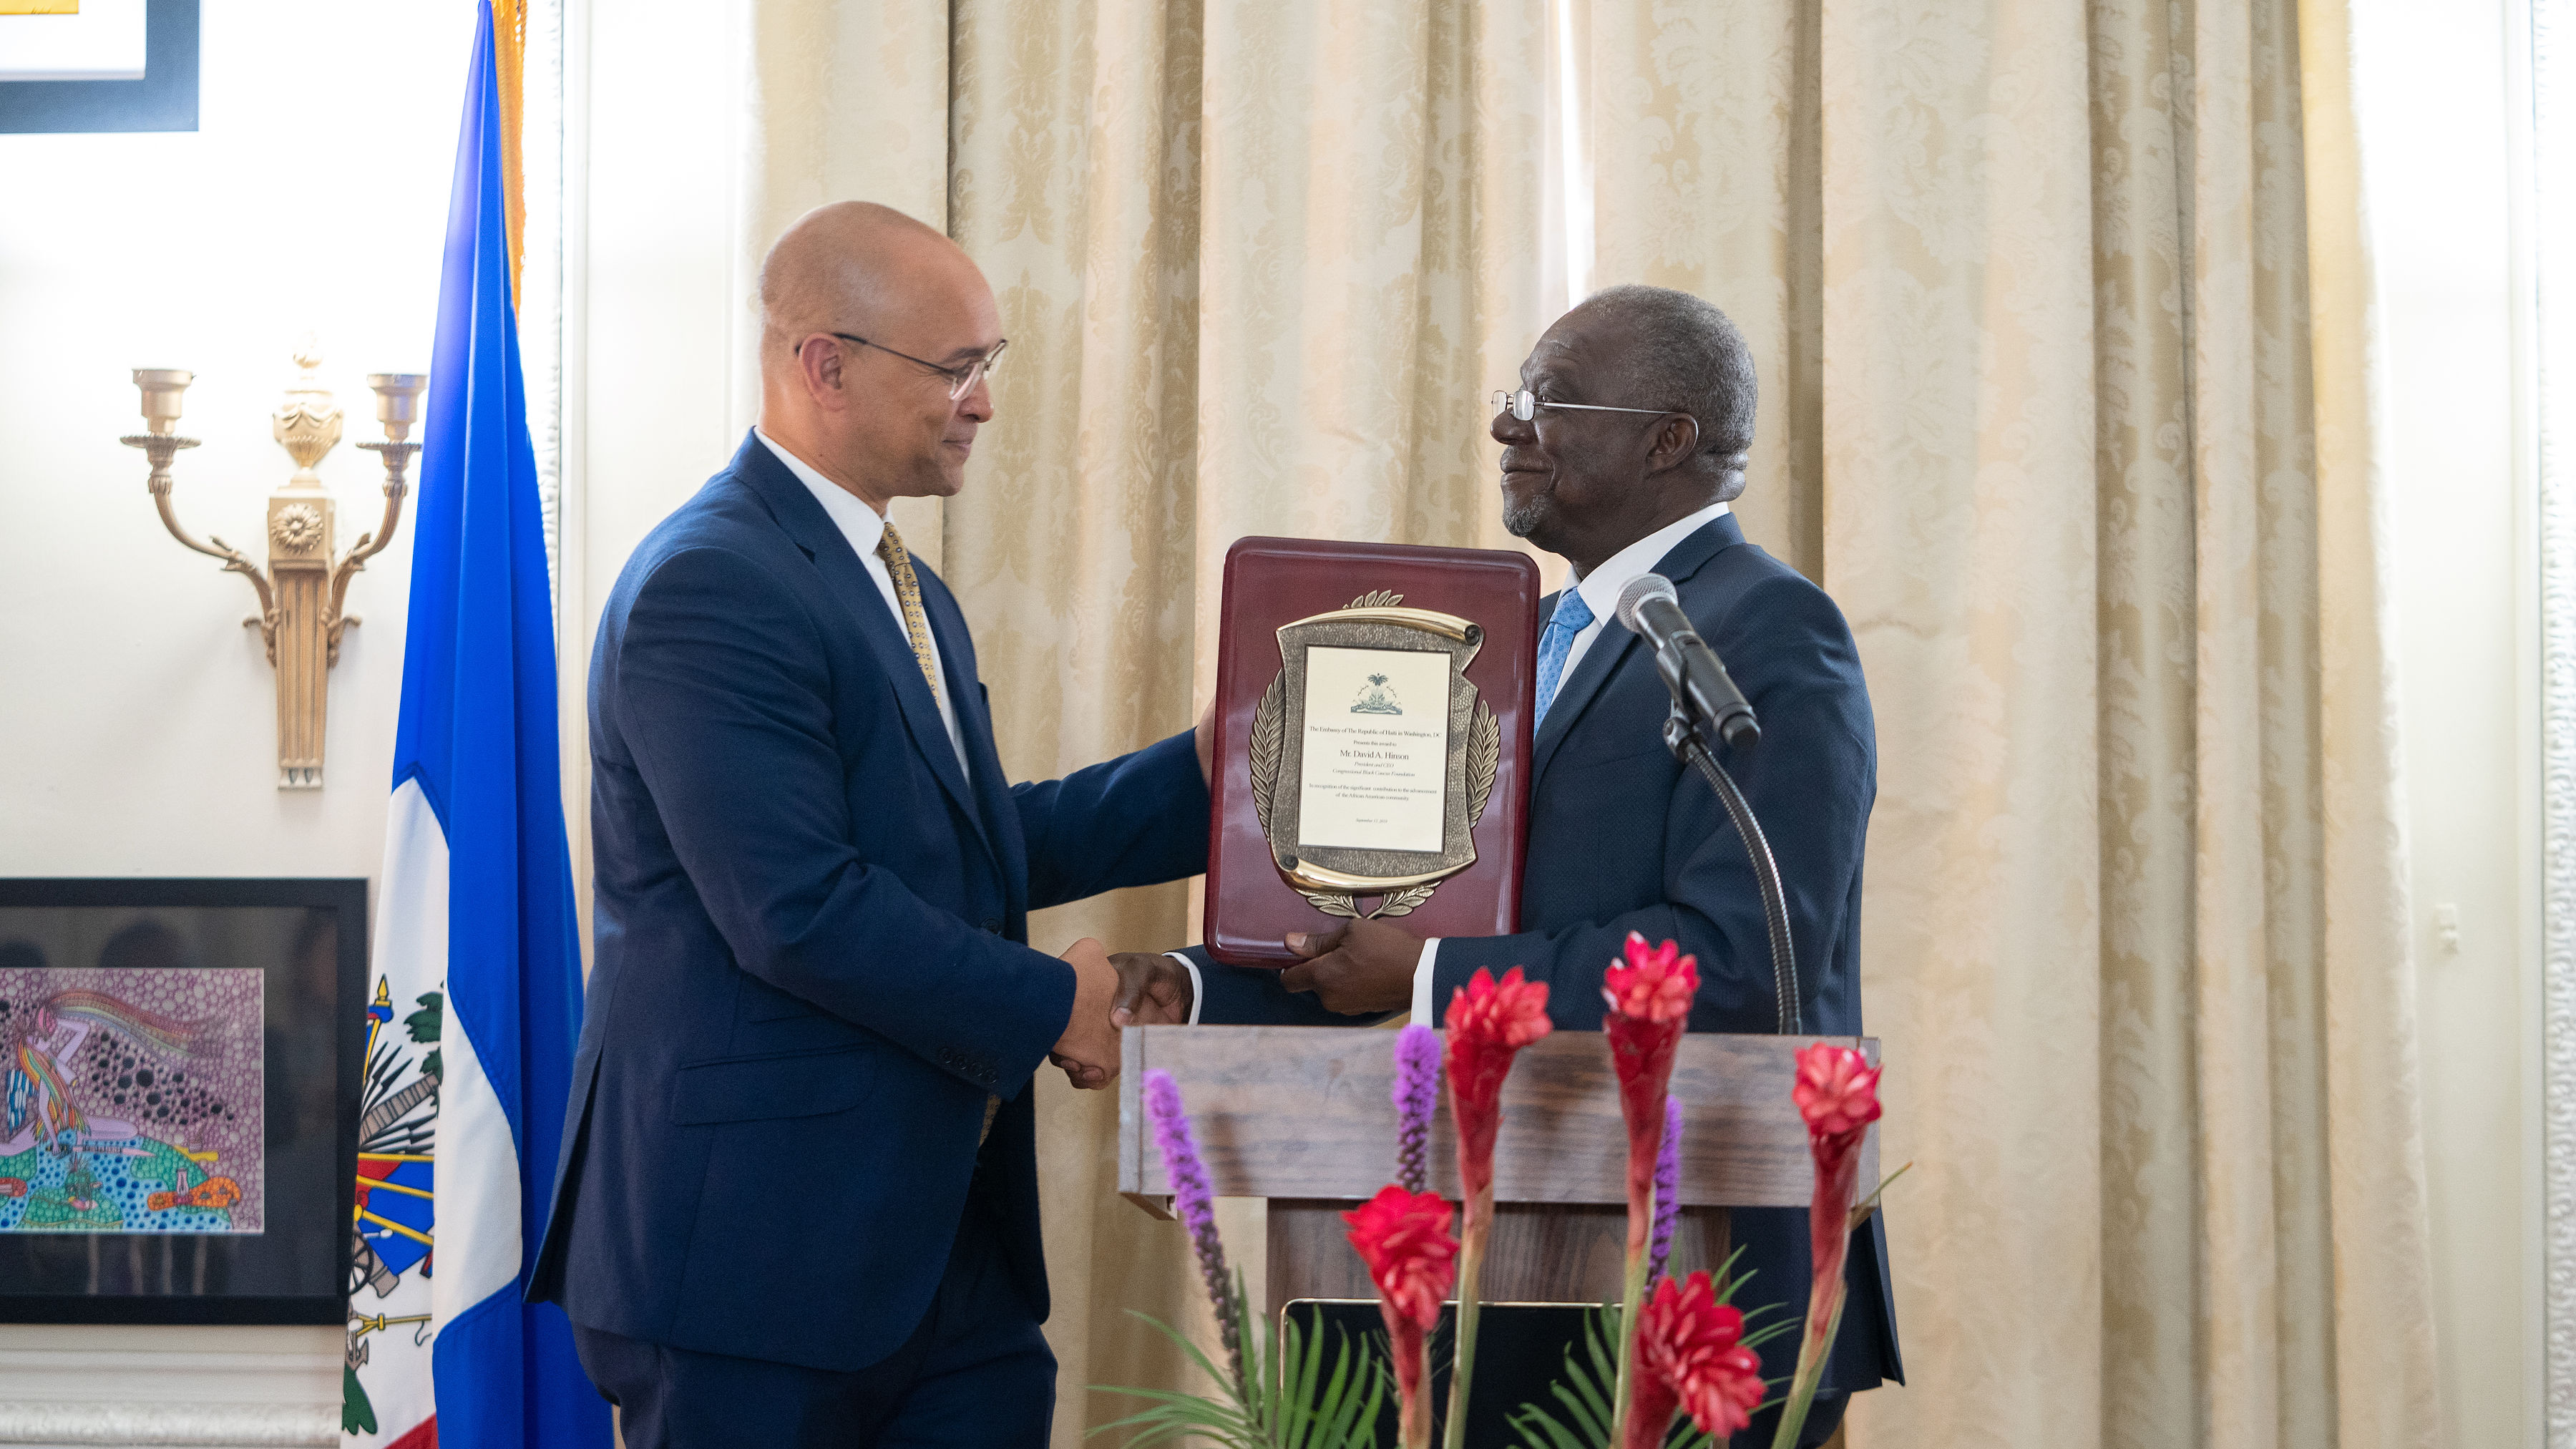 Embassy of Haiti Honors African American Trailblazers during the Congressional Black Caucus Foundation Annual Legislative Conference at a Private Reception